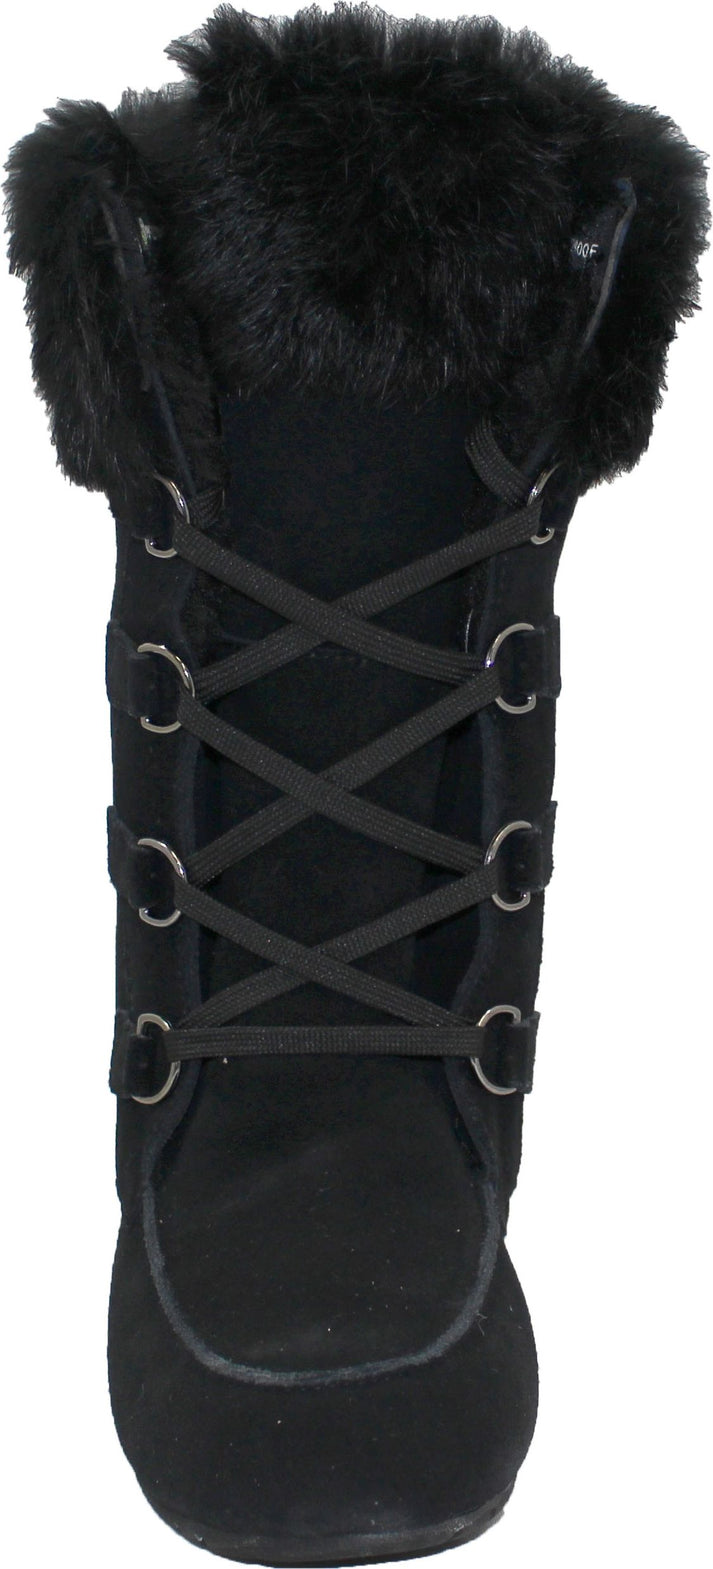 Urban Trail Boots Tall Laceup Black Suede Boot